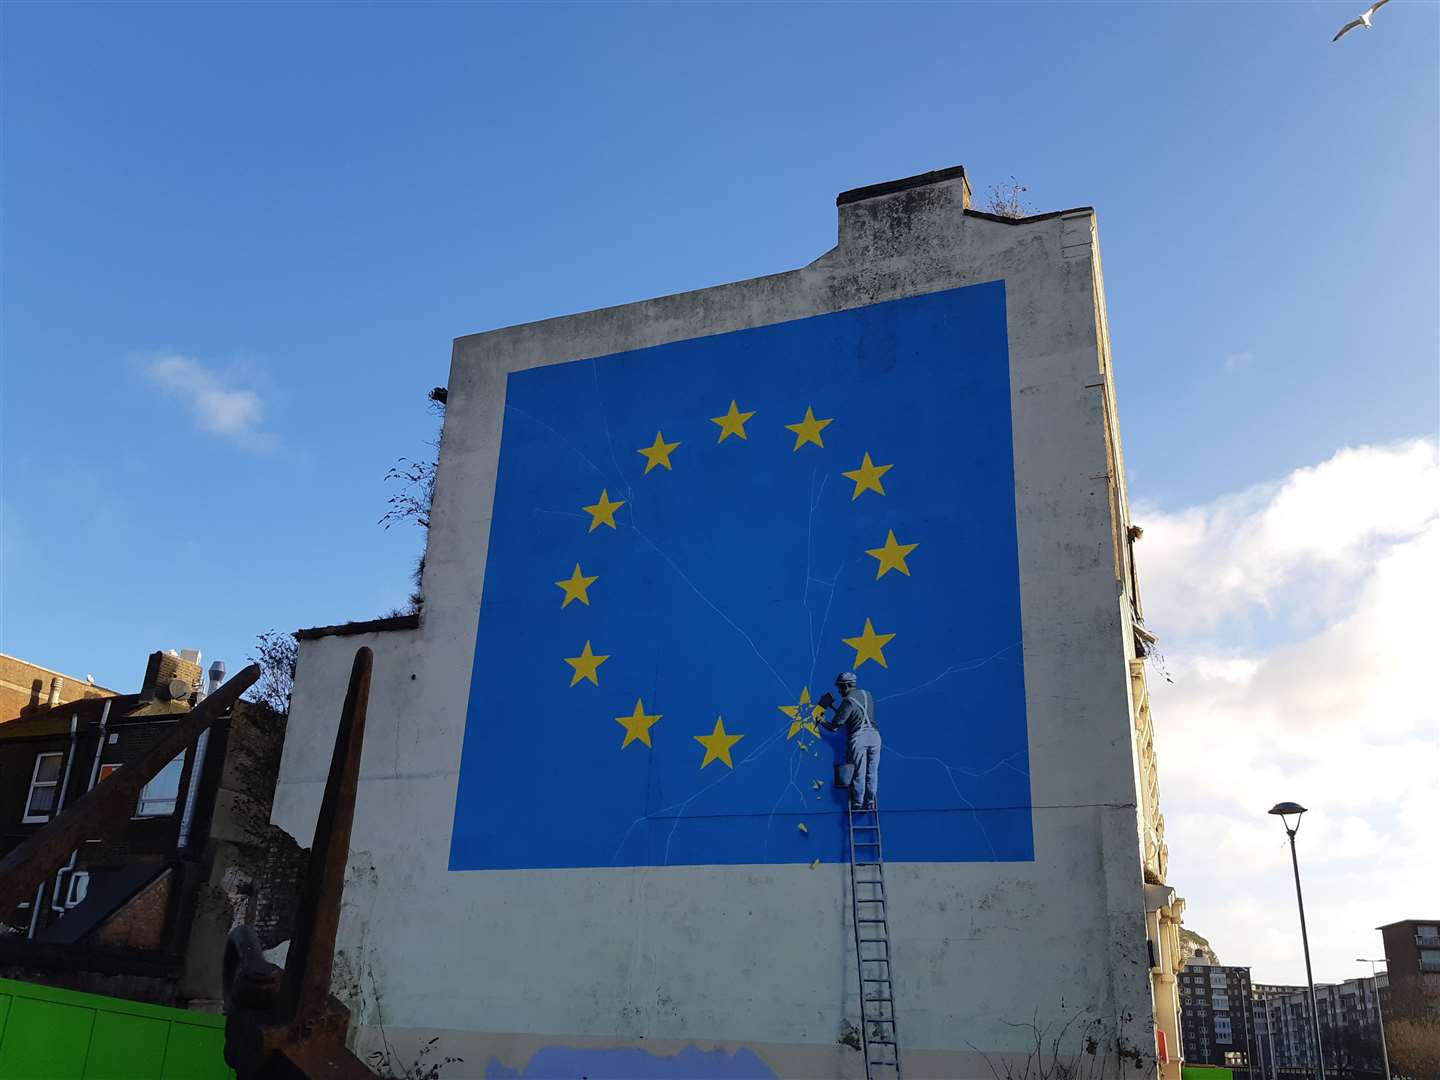 Banksy previously created this Brexit artwork in Dover, but it was later painted over